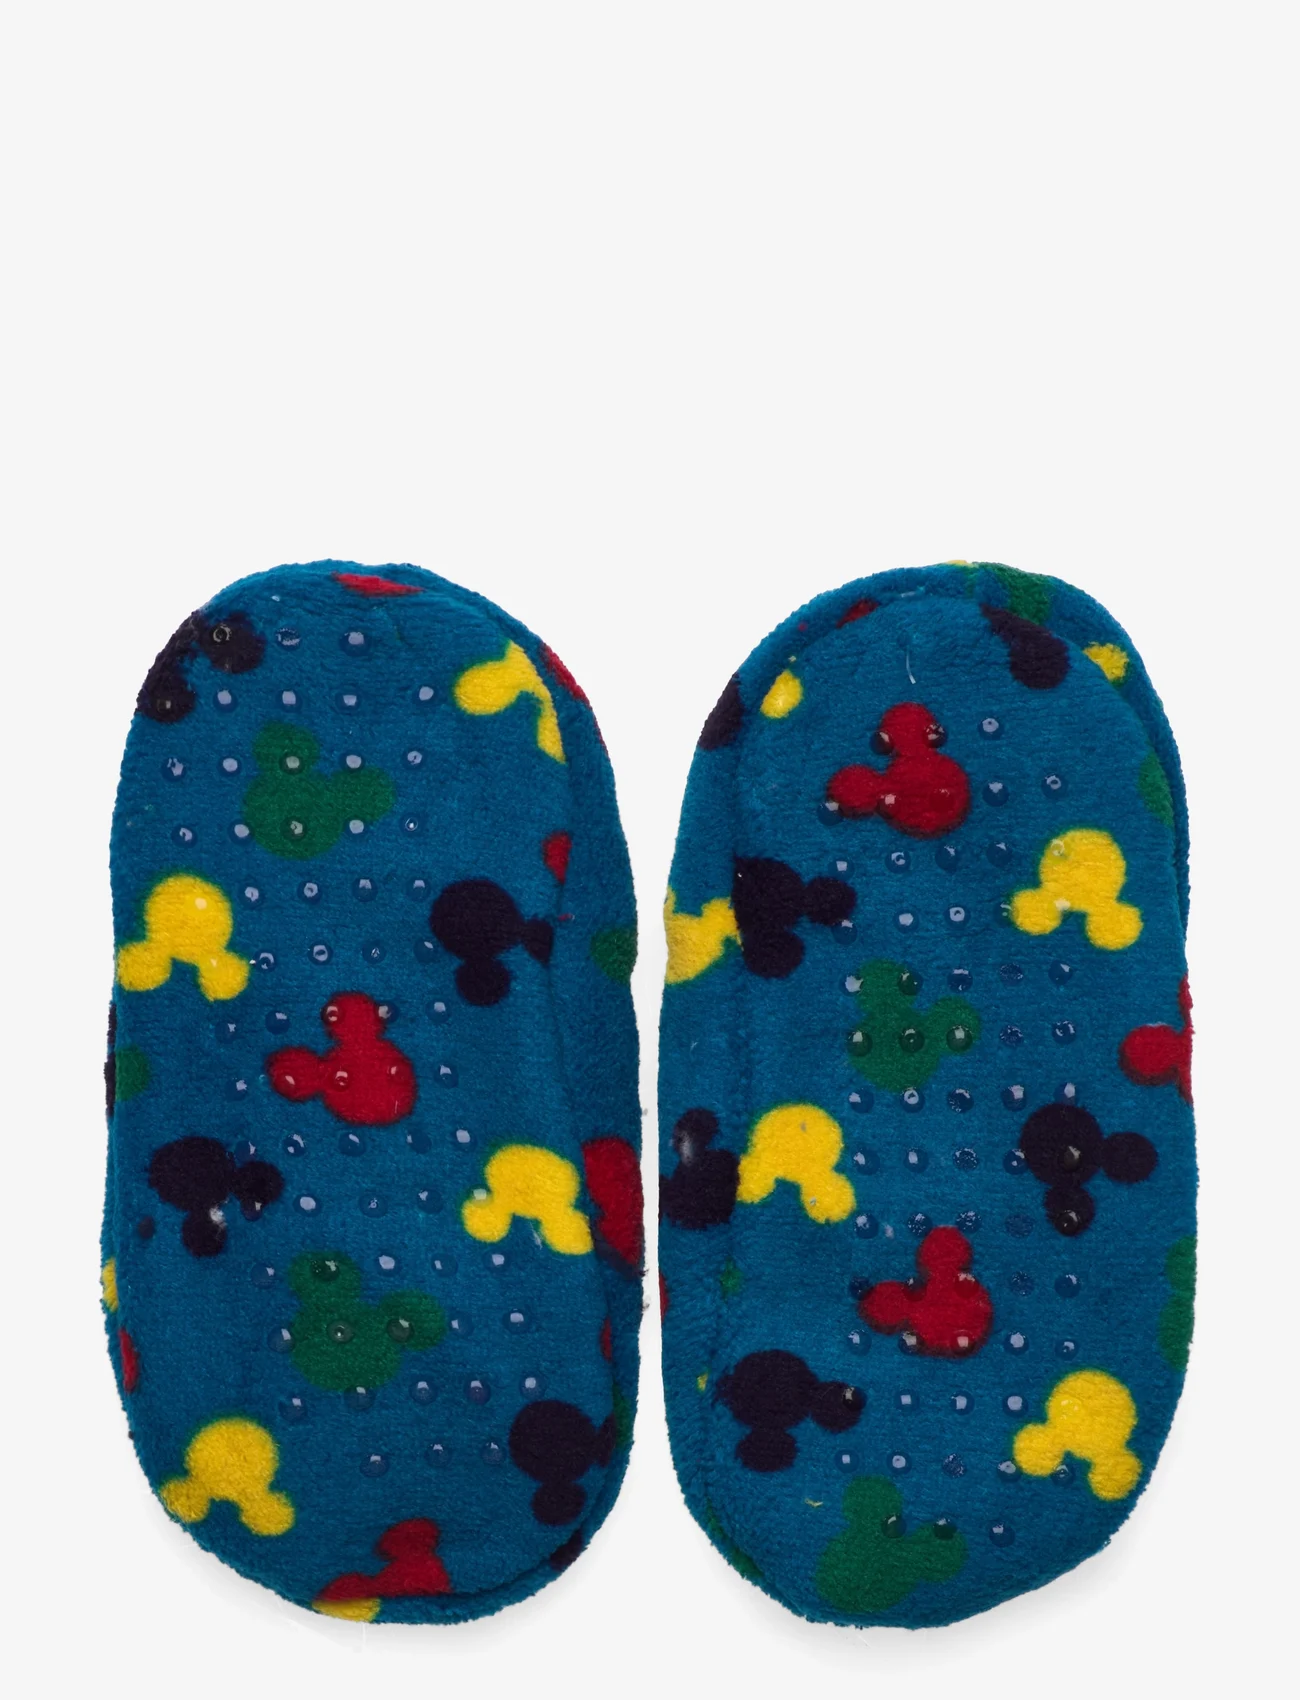 Disney - SLIPPERS - lowest prices - blue - 1